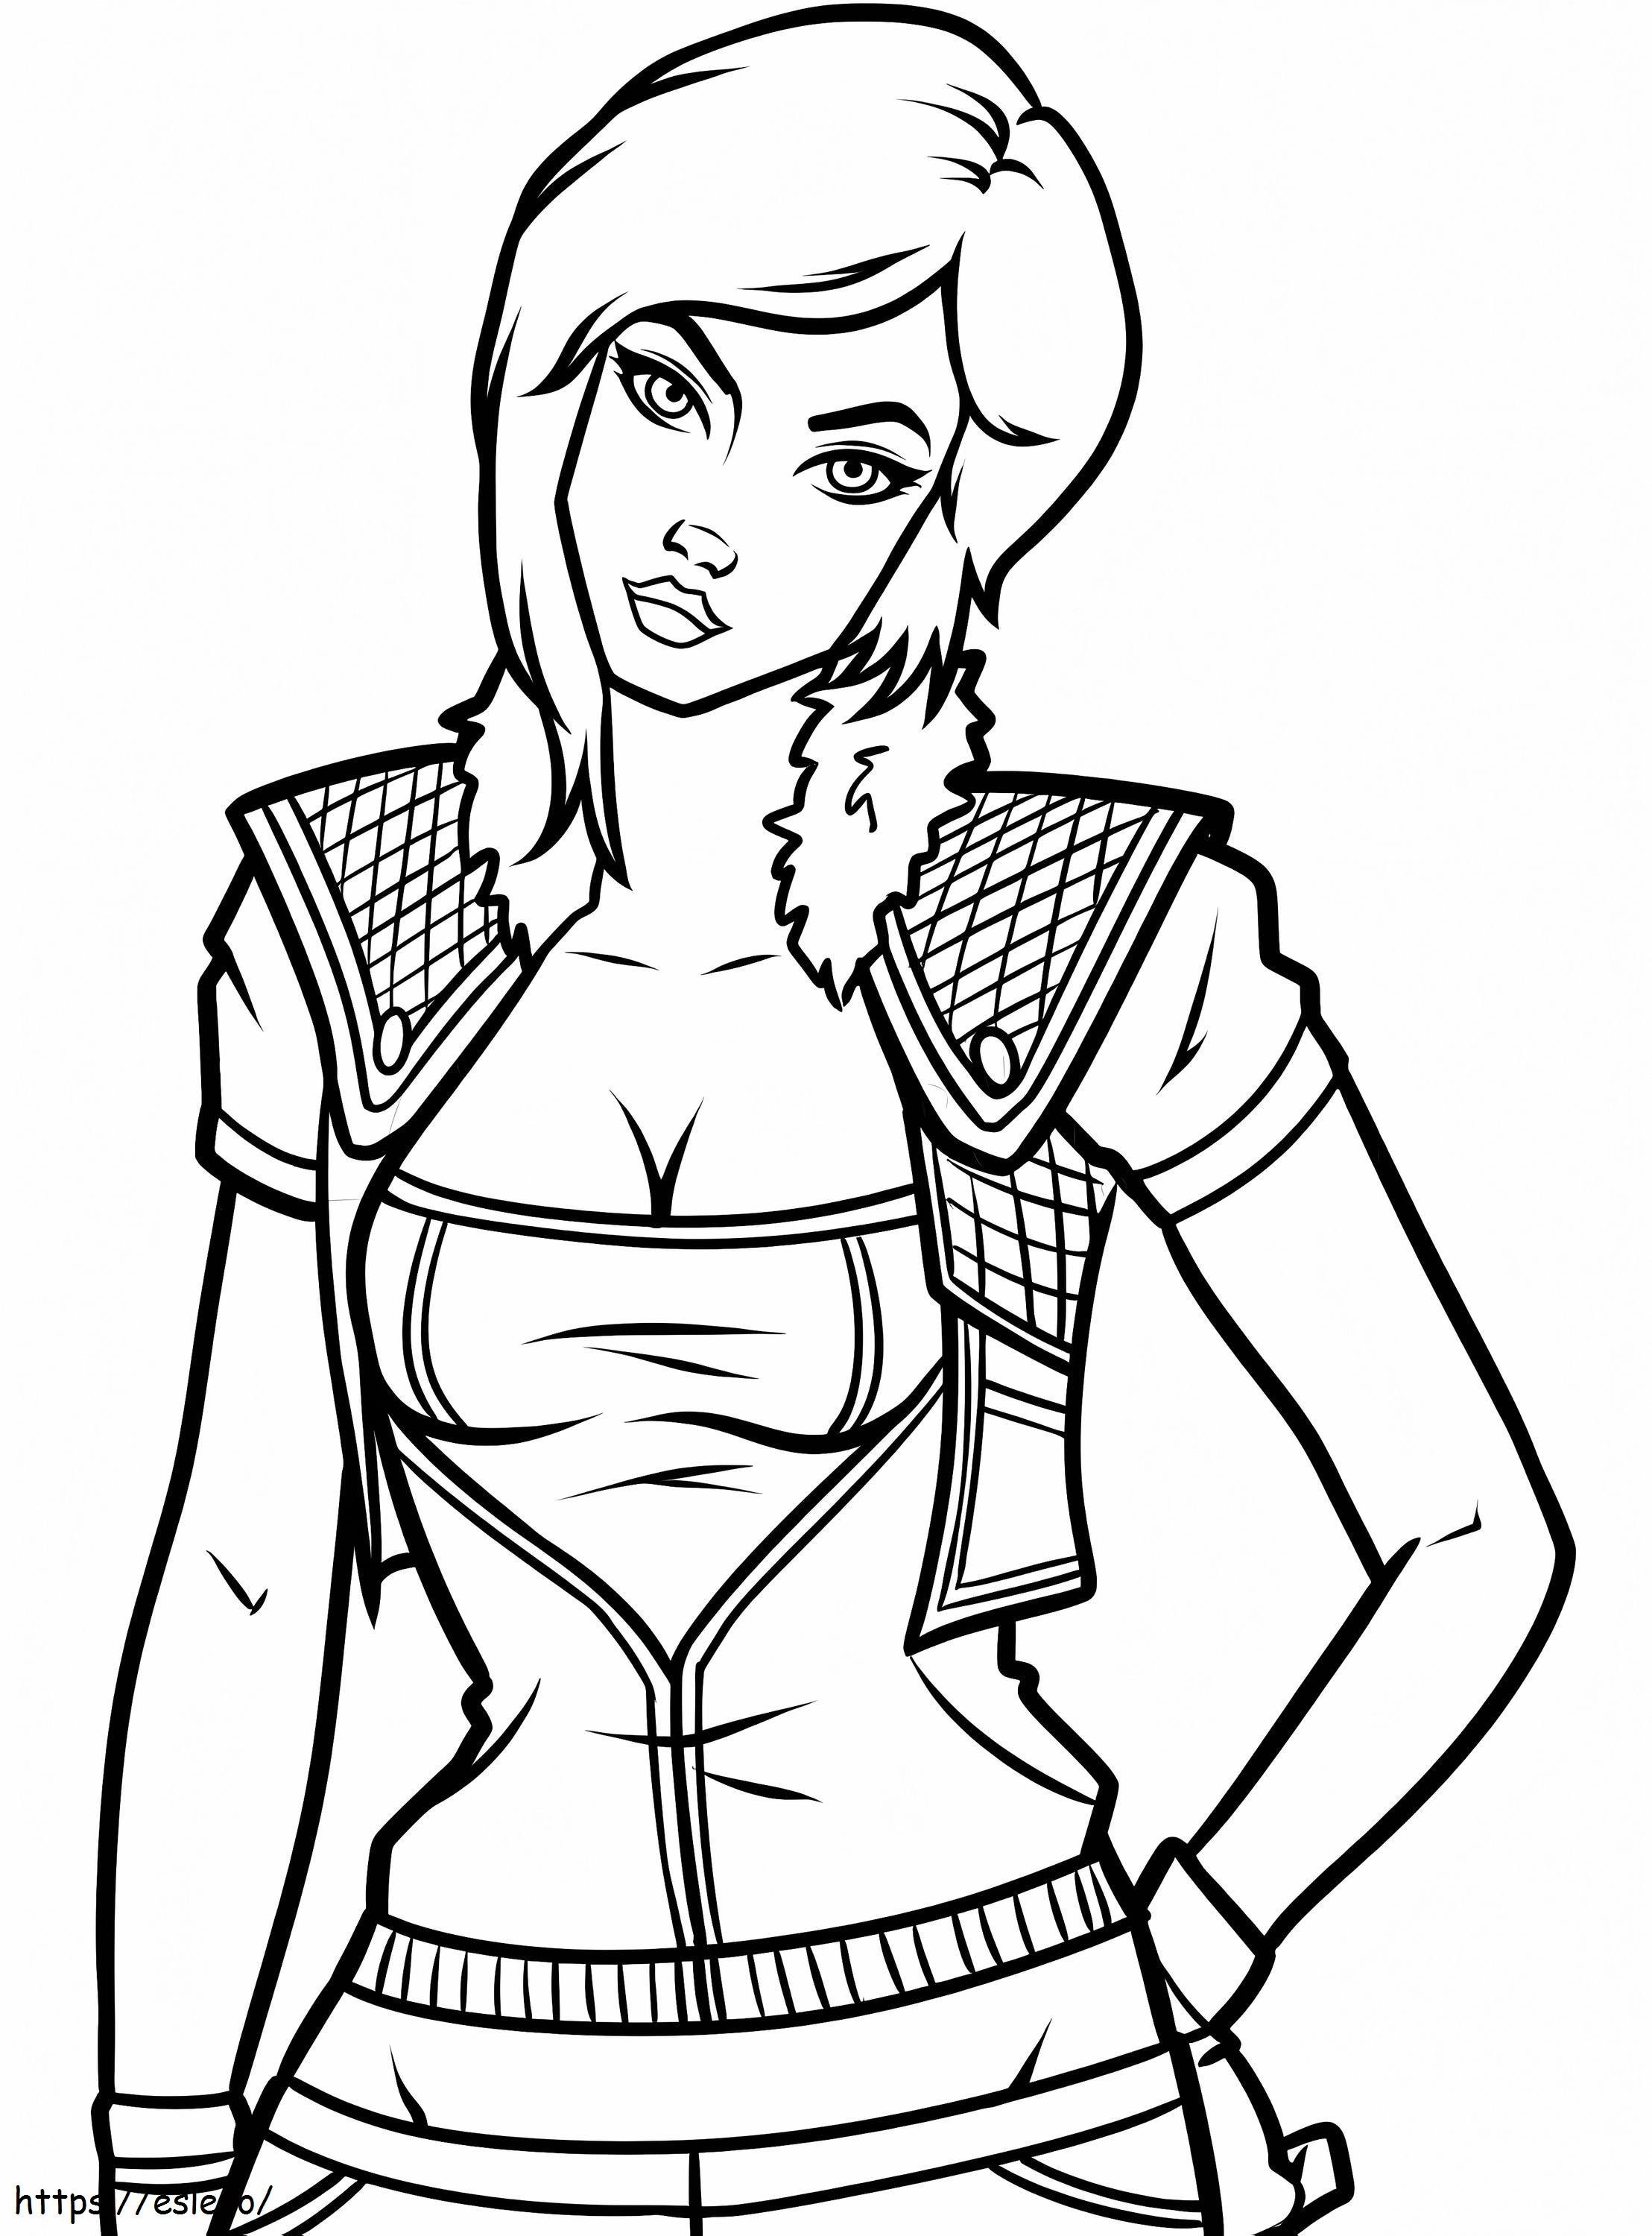 Lilith From Borderlands coloring page